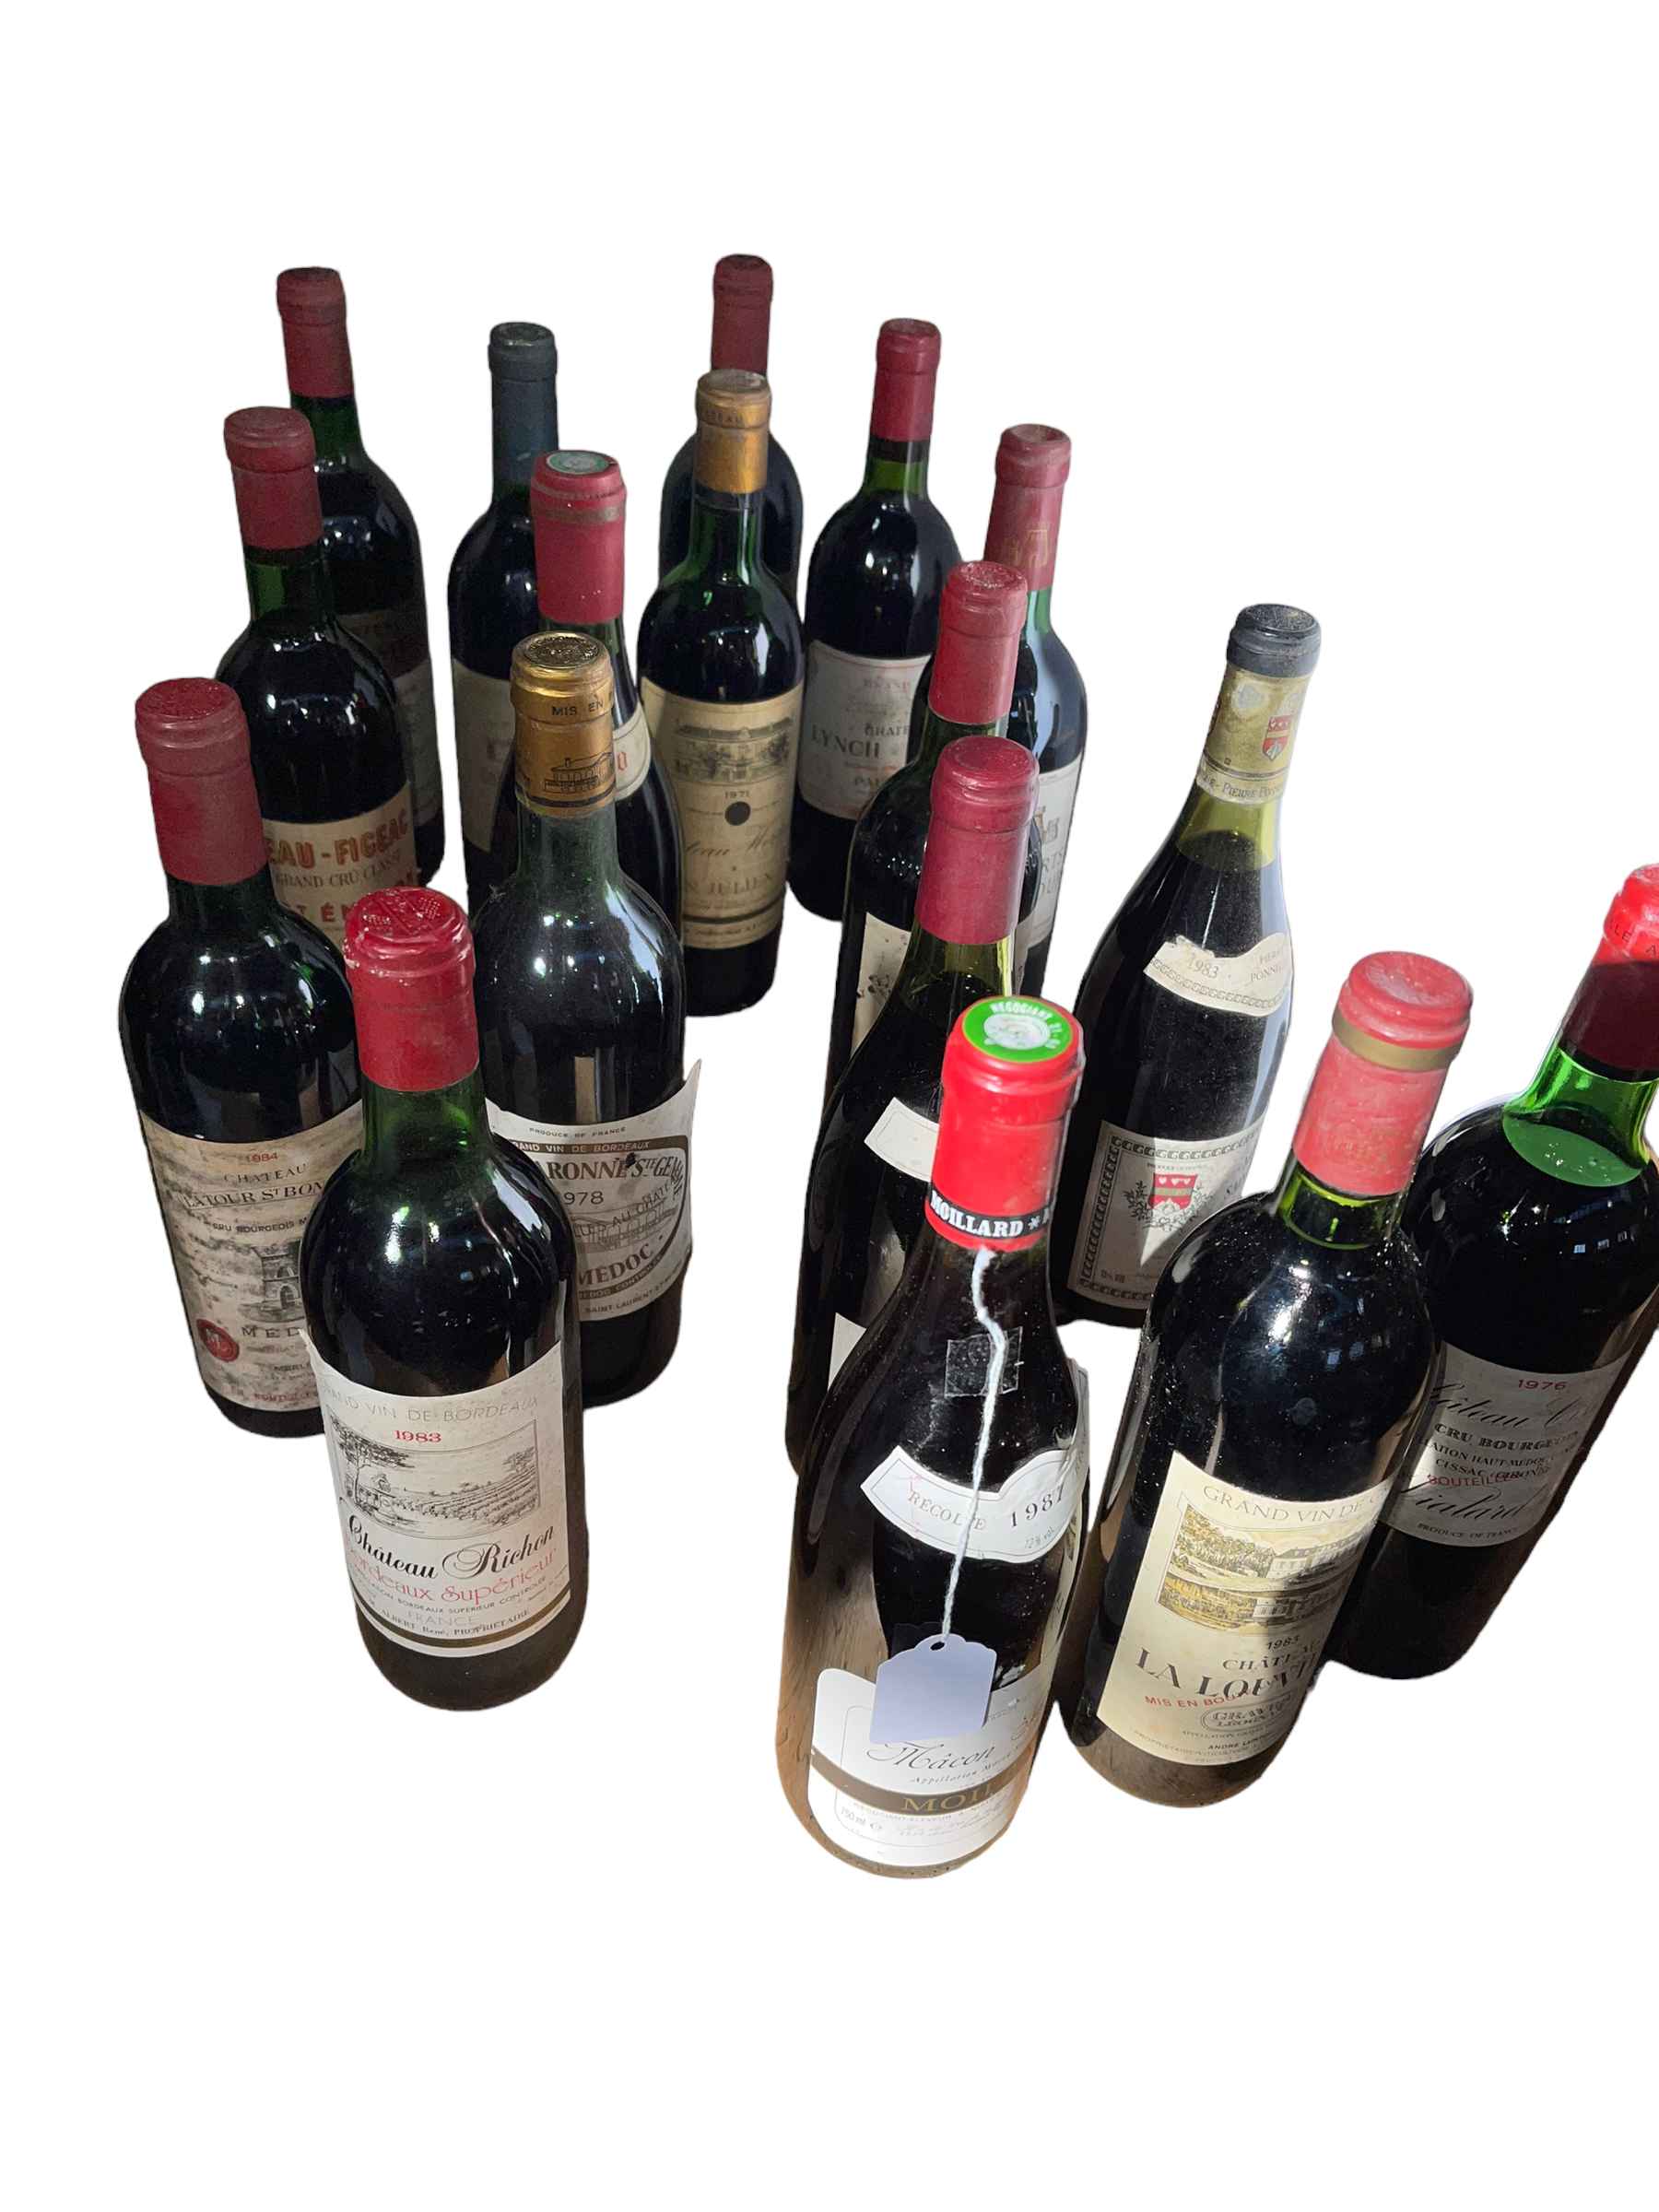 Seventeen bottles of red wine including Chateau Latour and Chateau Boyd-Contenas Grand Cru.